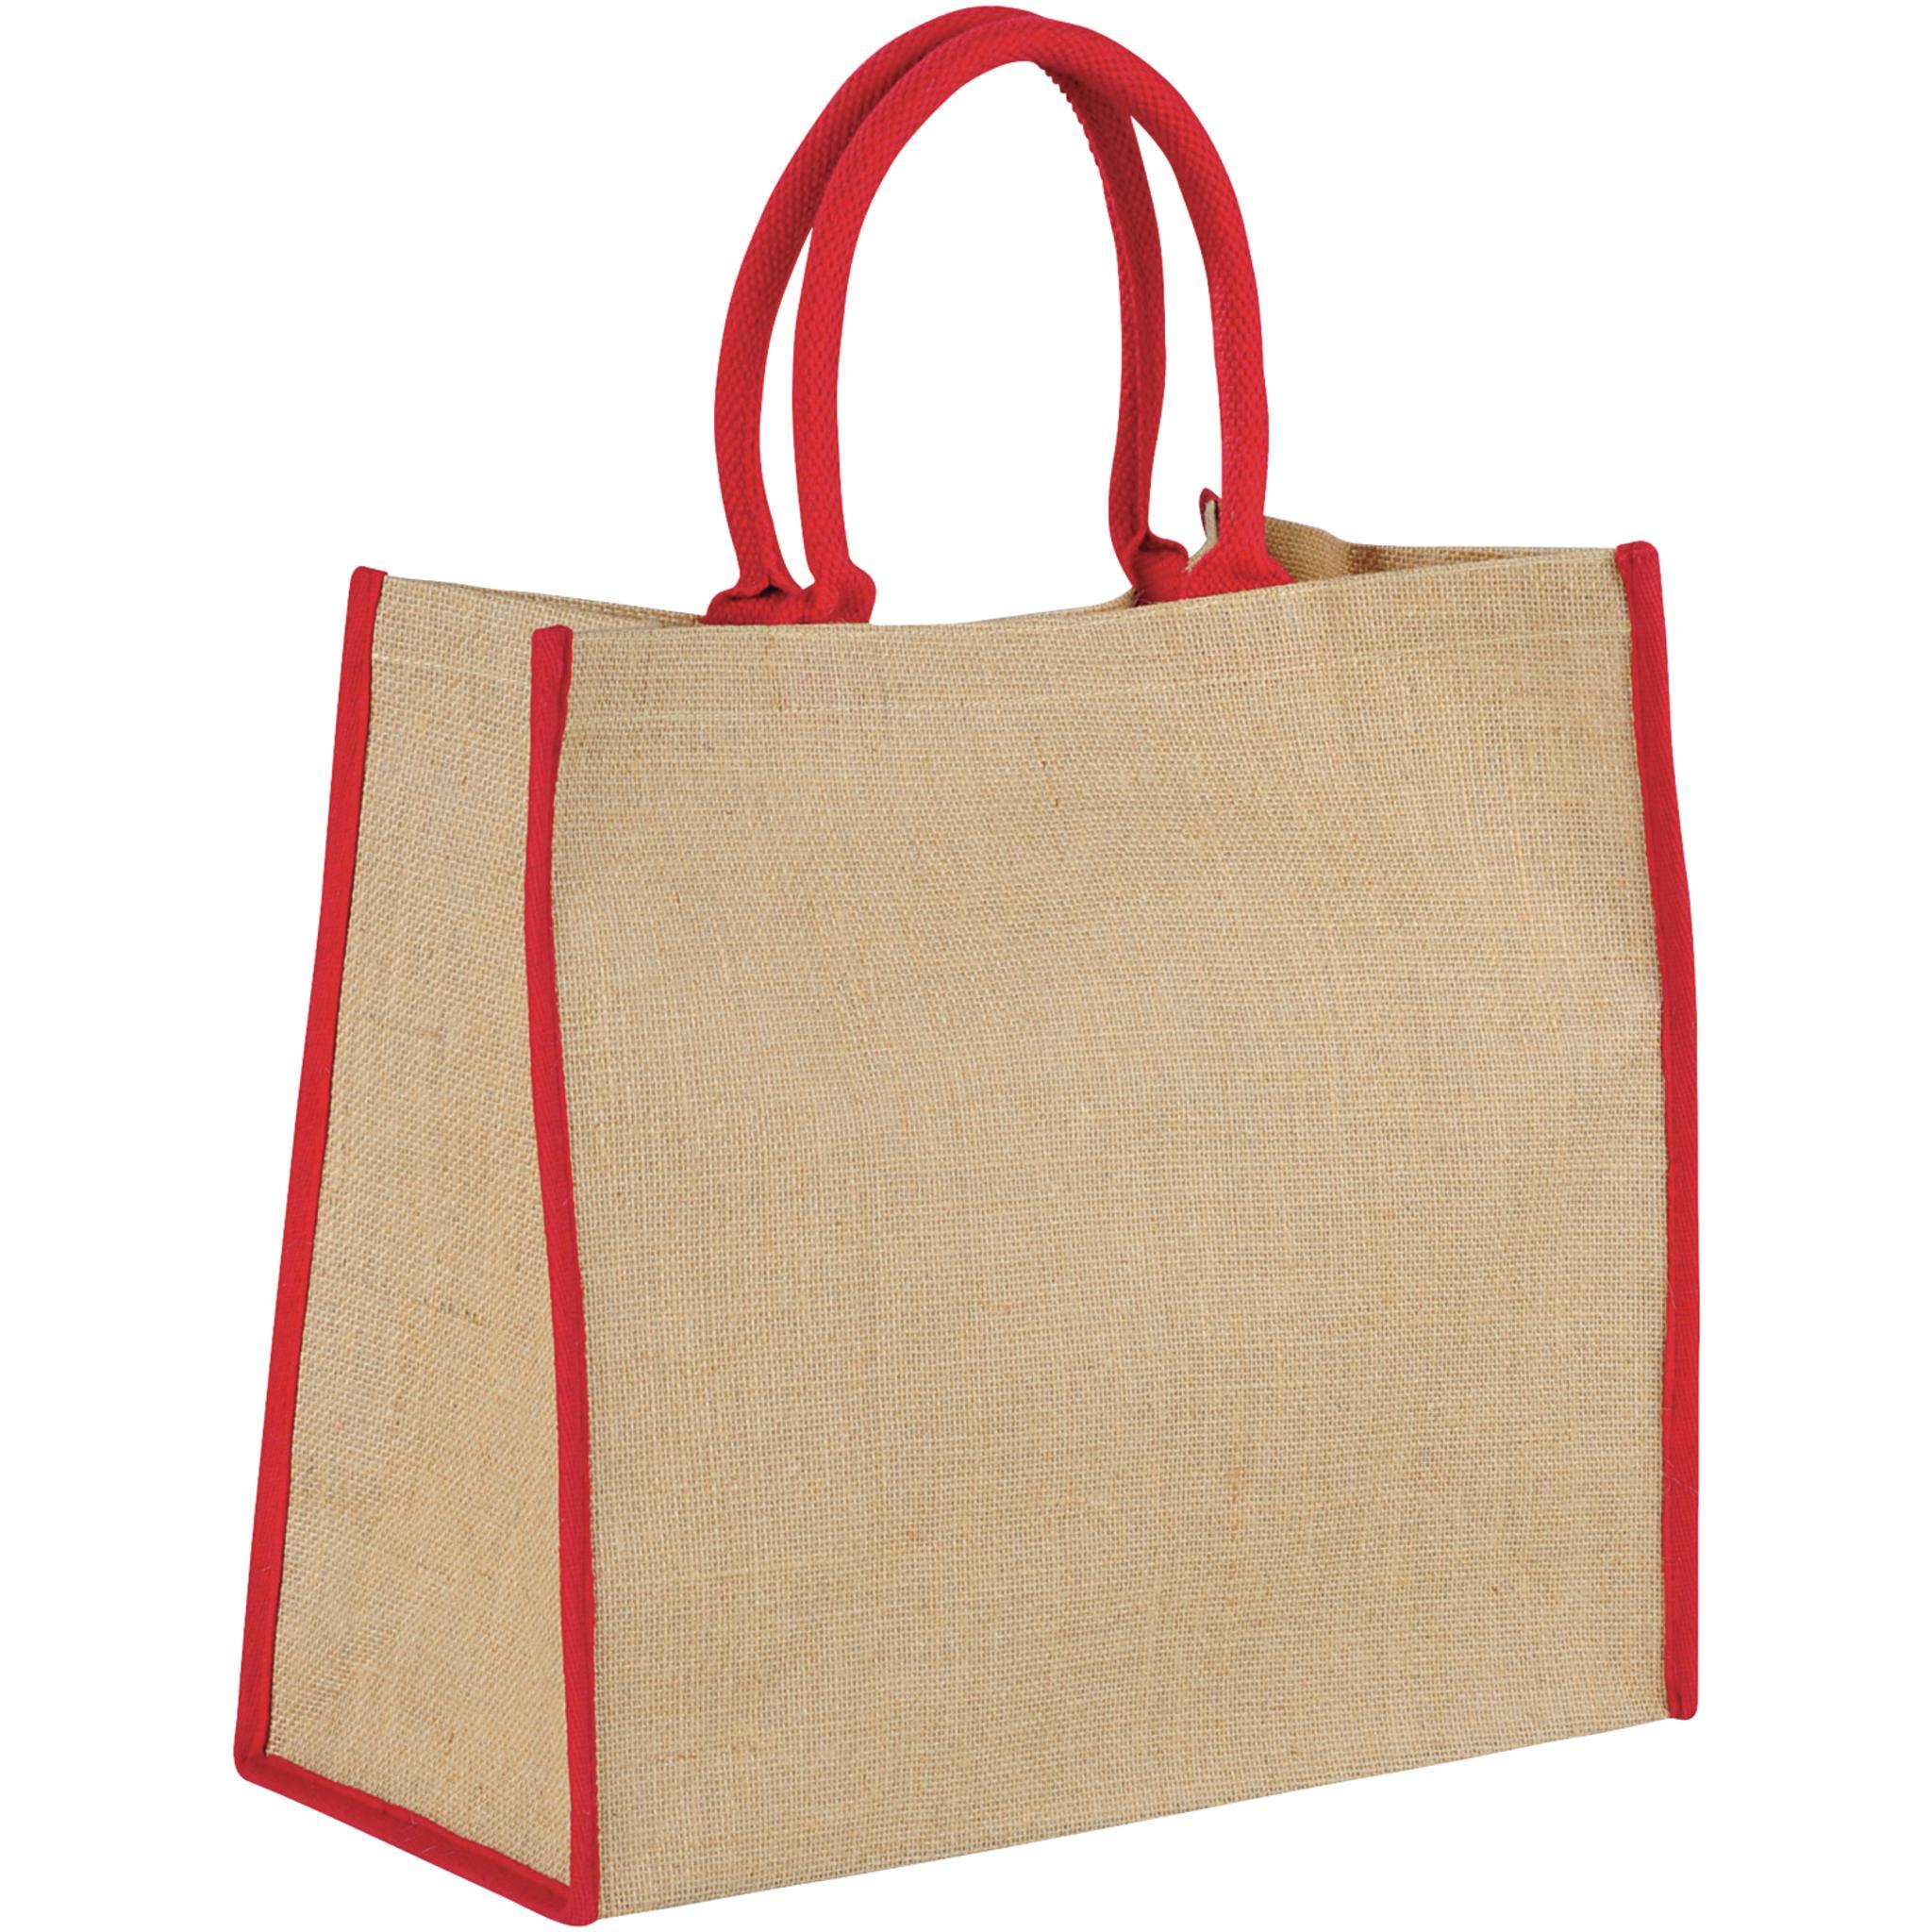 Bullet The Large Jute Tote (Pack of 2) (Natural/Red) (40.5 x 18.5 x 36cm)